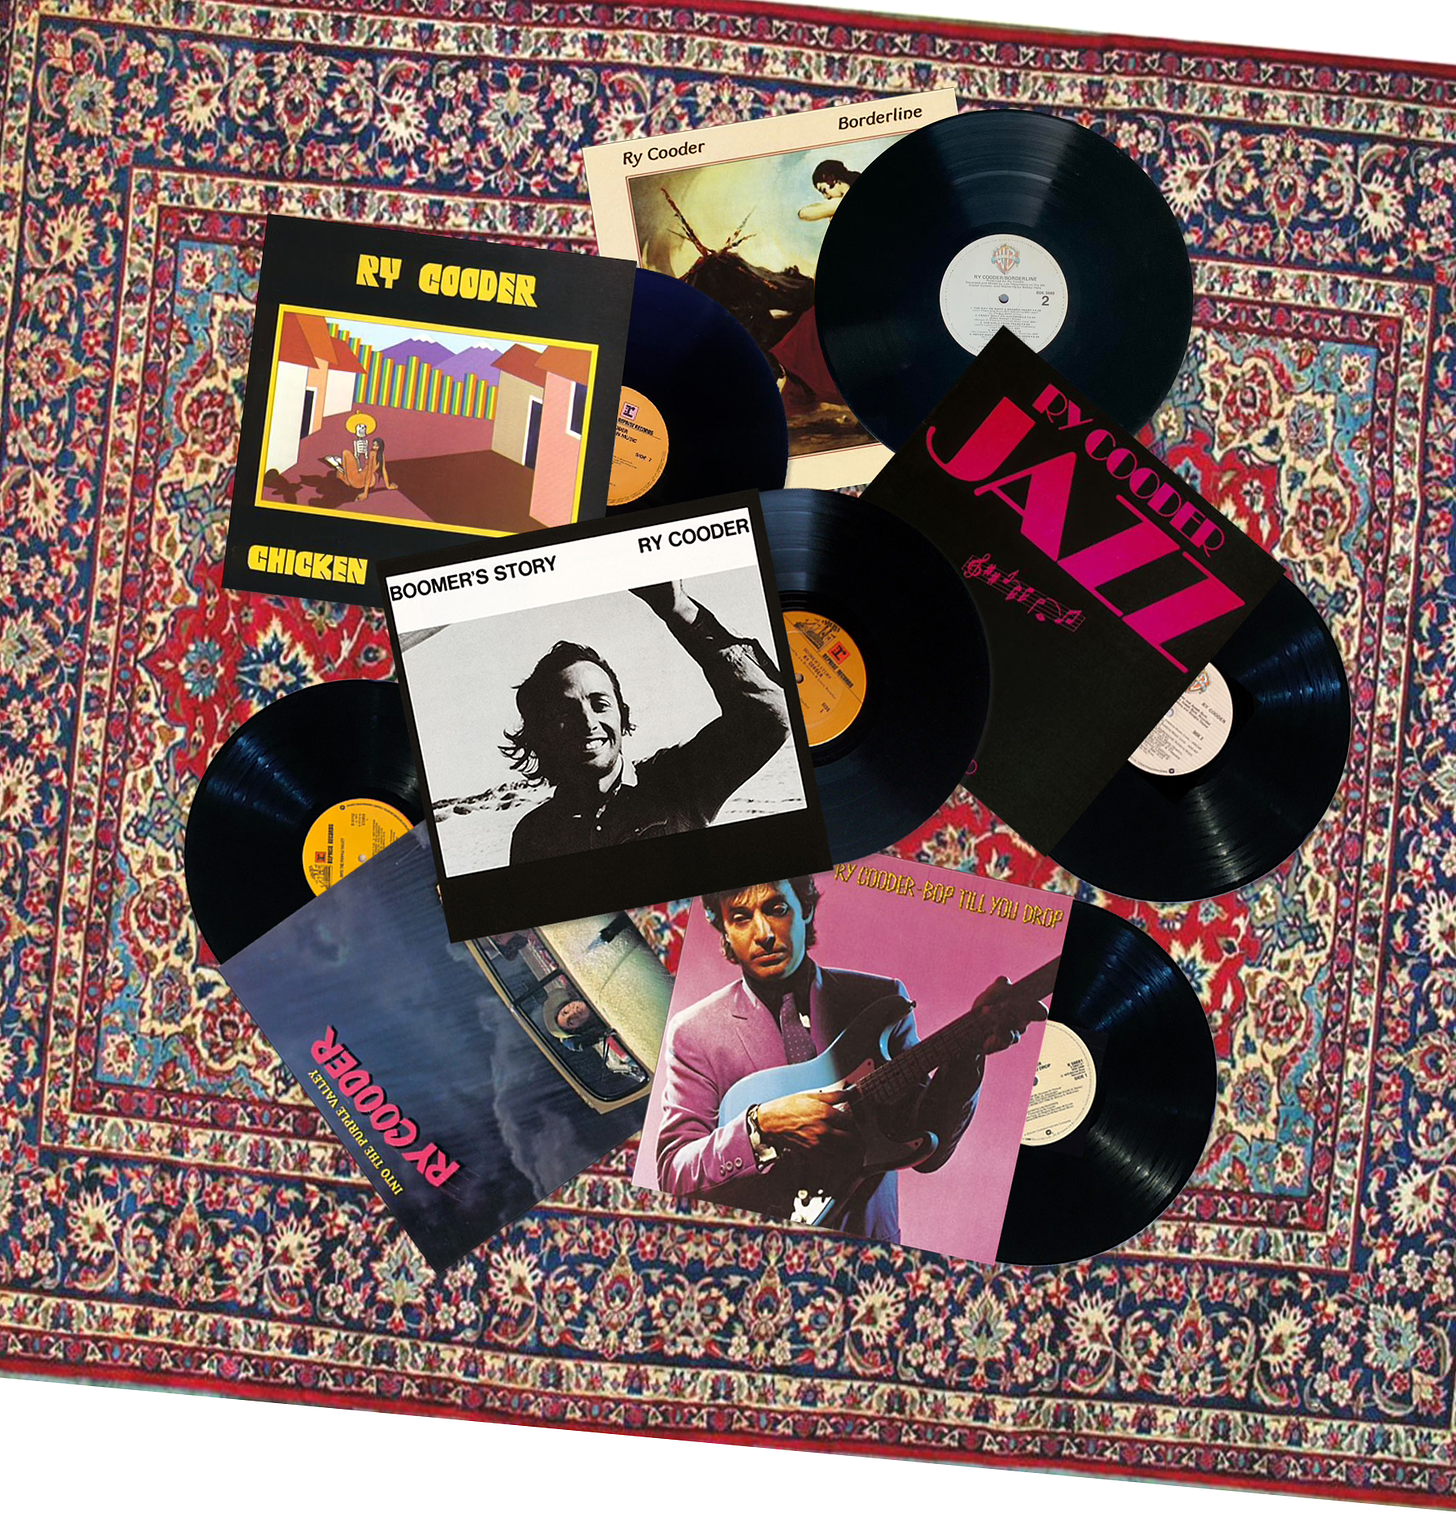 Photo collage of six early Ry Cooder records spilling out of their sleeves against a Persian carpet background.